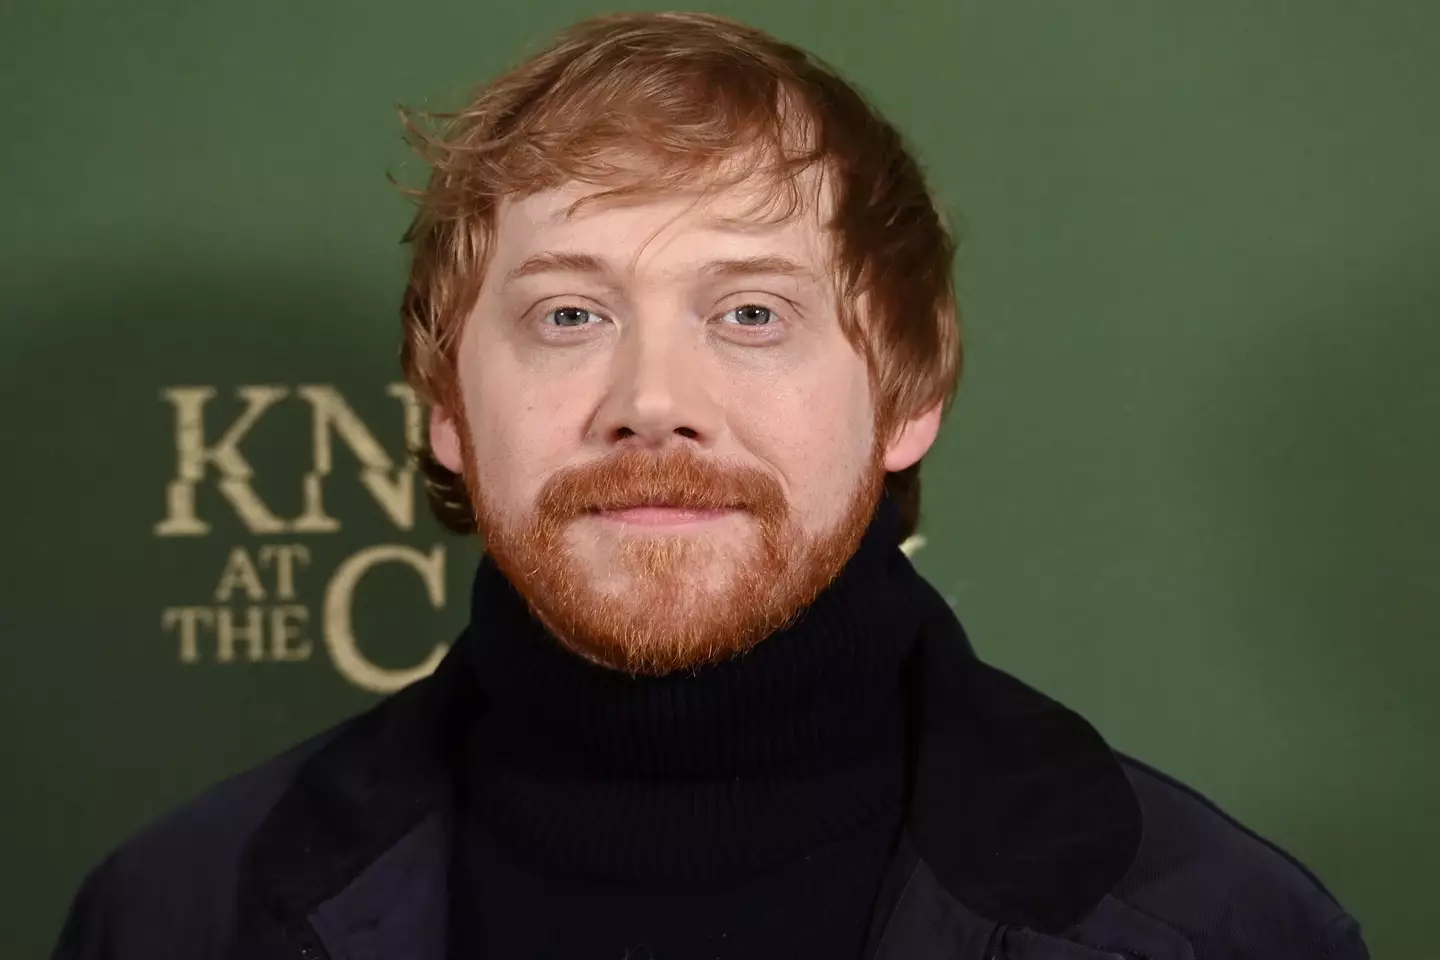 Rupert Grint says he sees Rowling as his 'auntie' (Dave J Hogan/Getty Images)